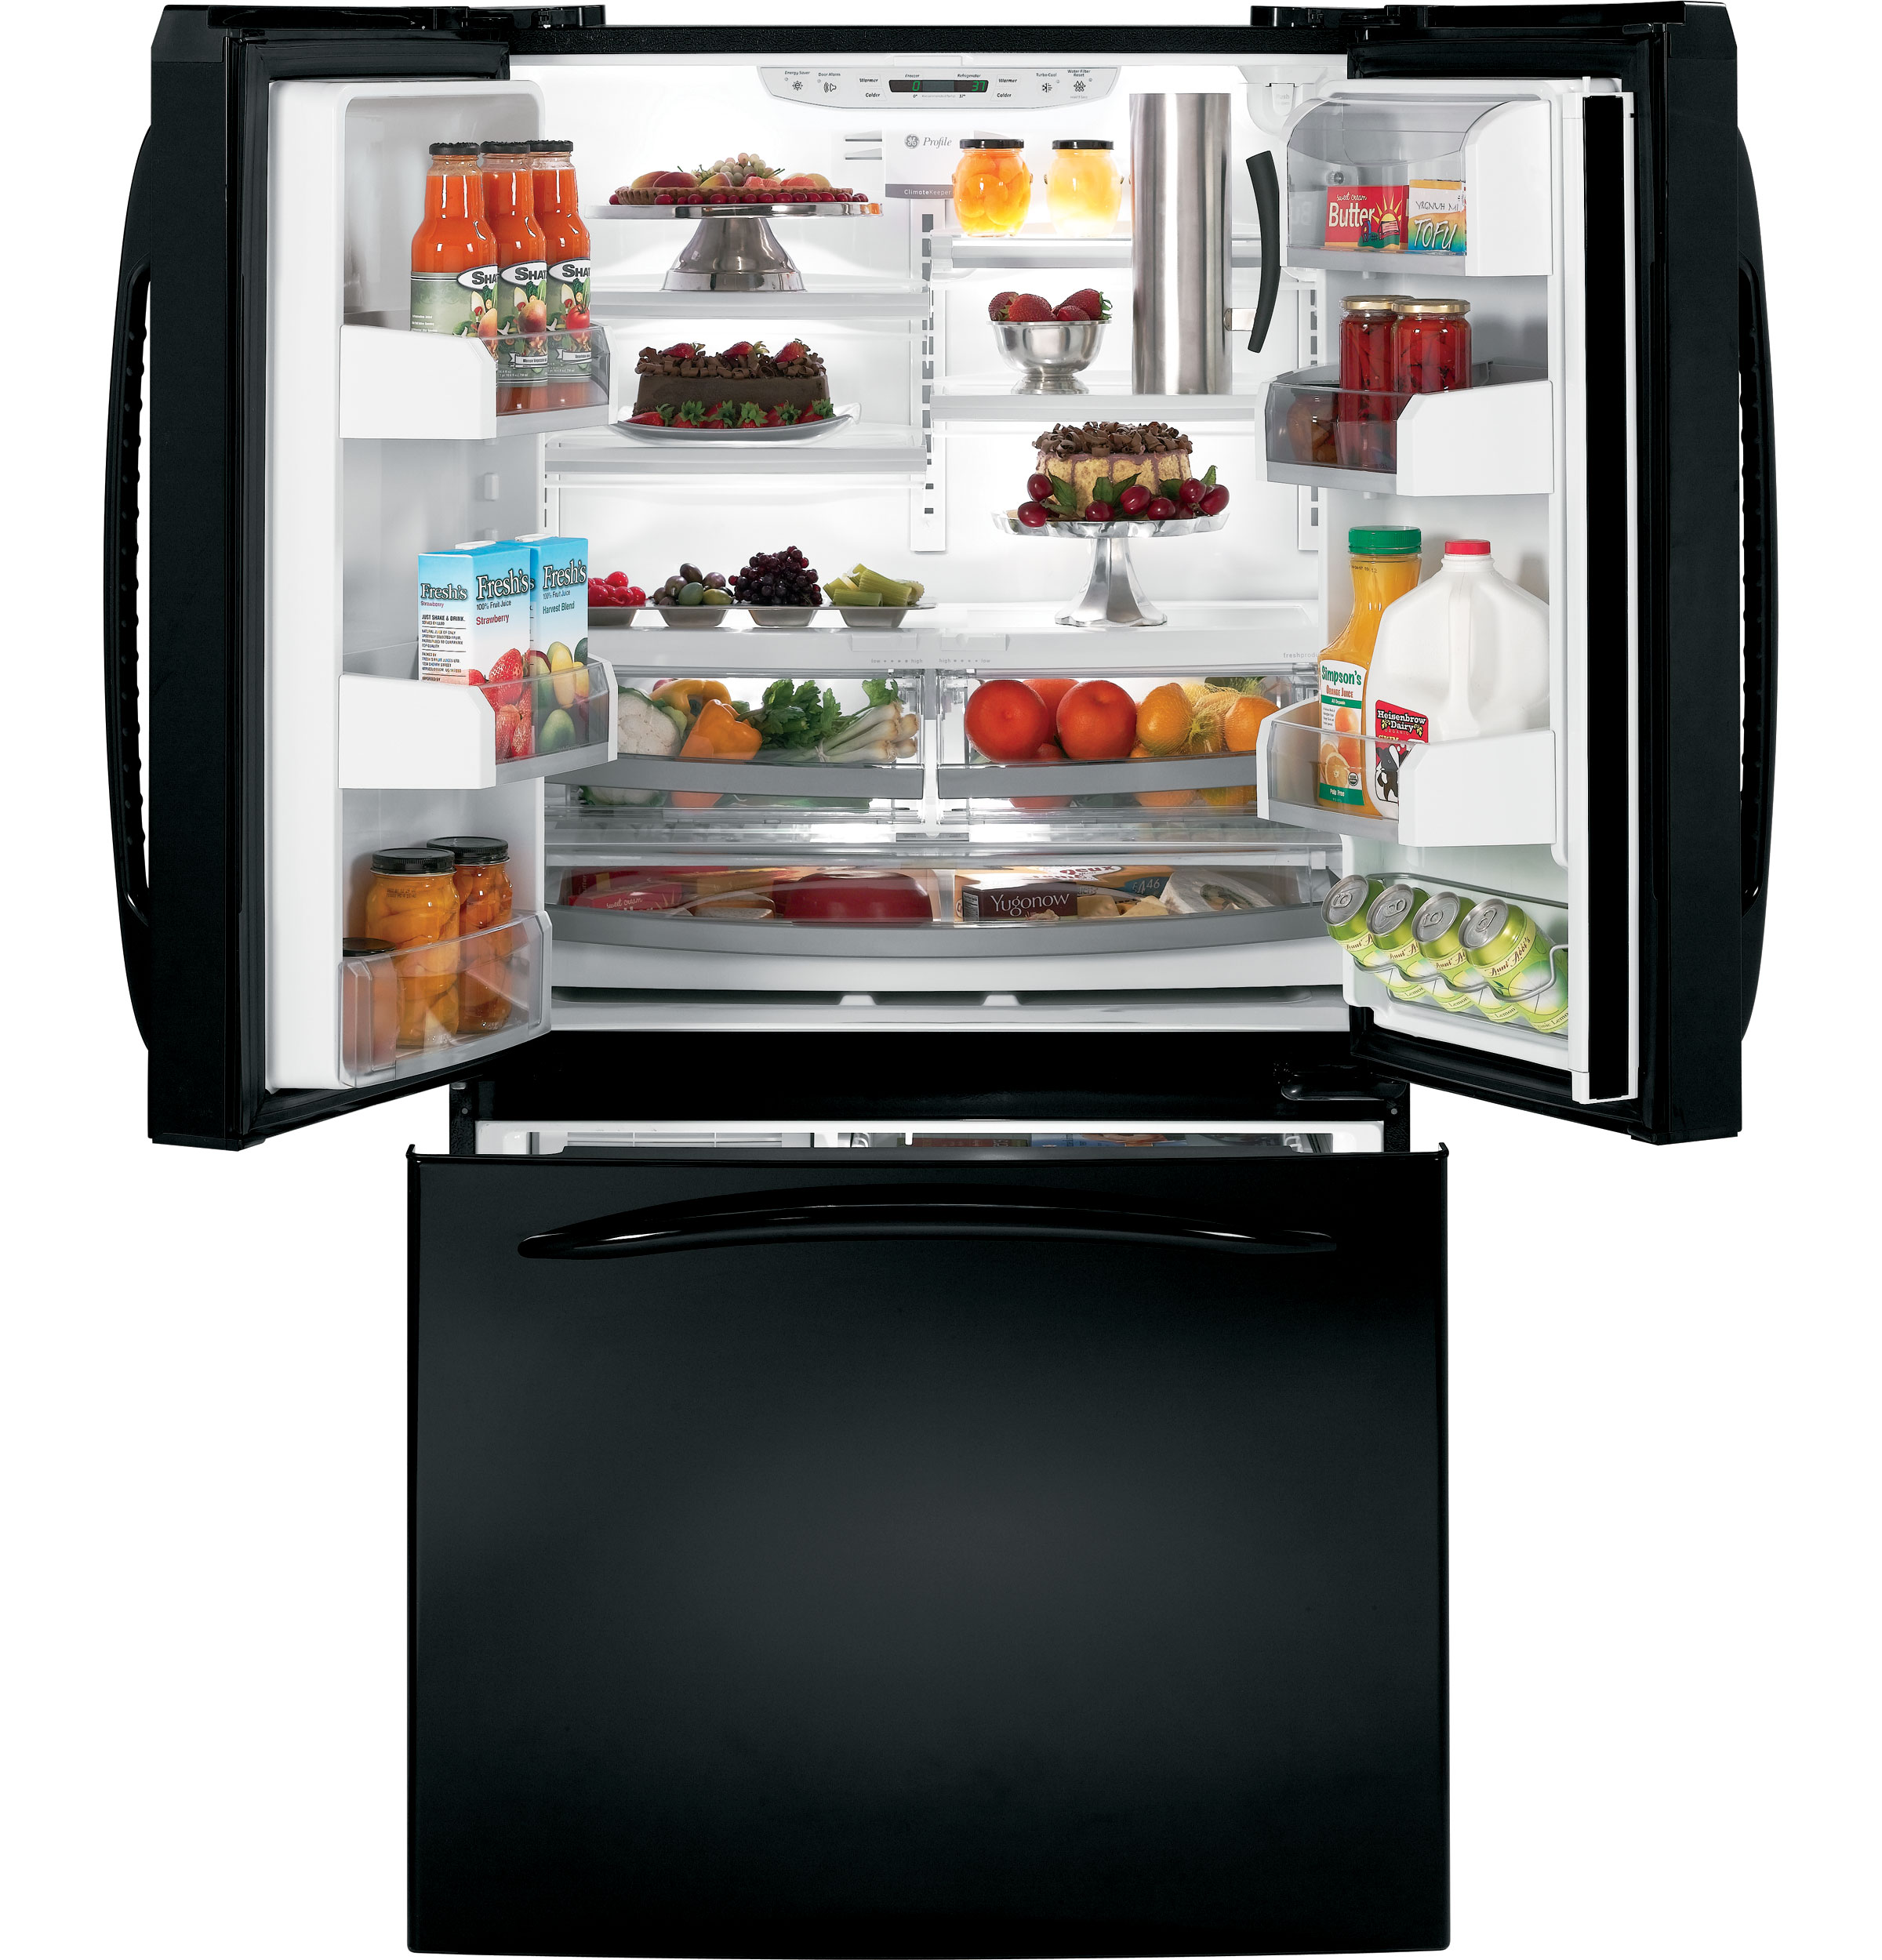 GE Profile™ ENERGY STAR® 20.8 Cu. Ft. French-Door Refrigerator with Icemaker